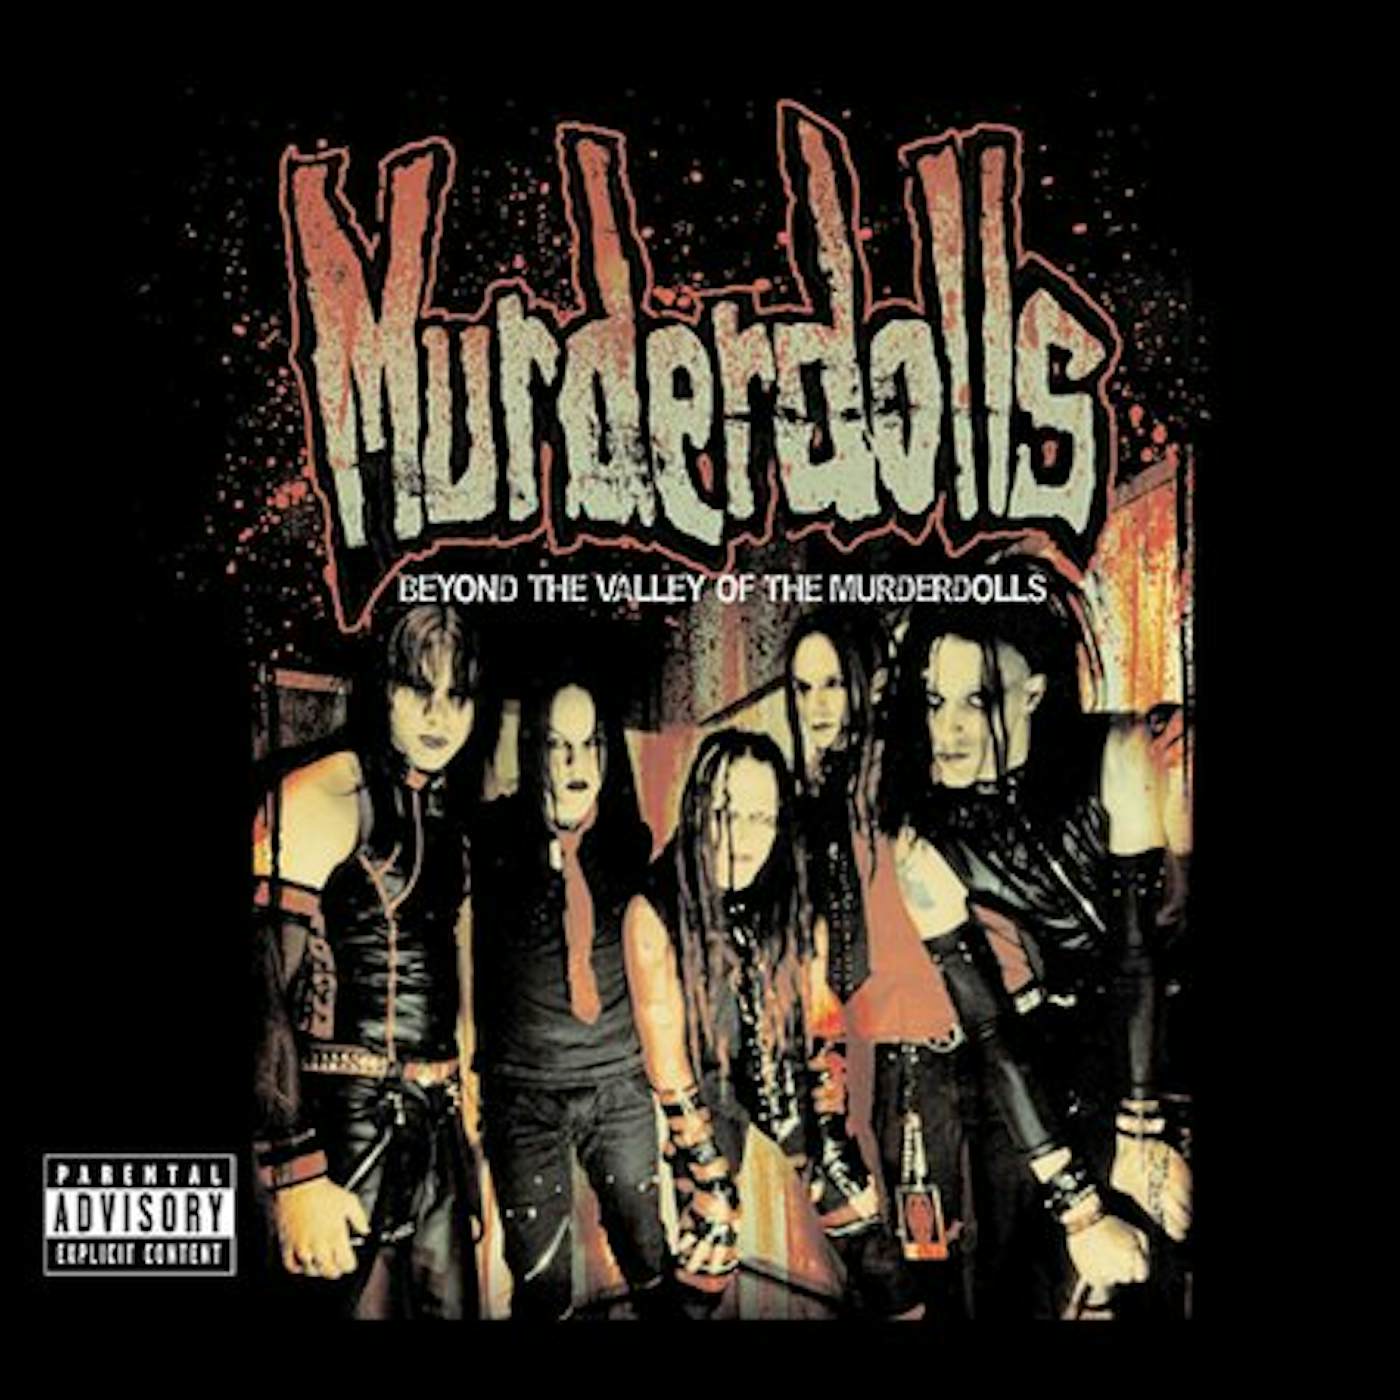 BEYOND THE VALLEY OF THE MURDERDOLLS CD